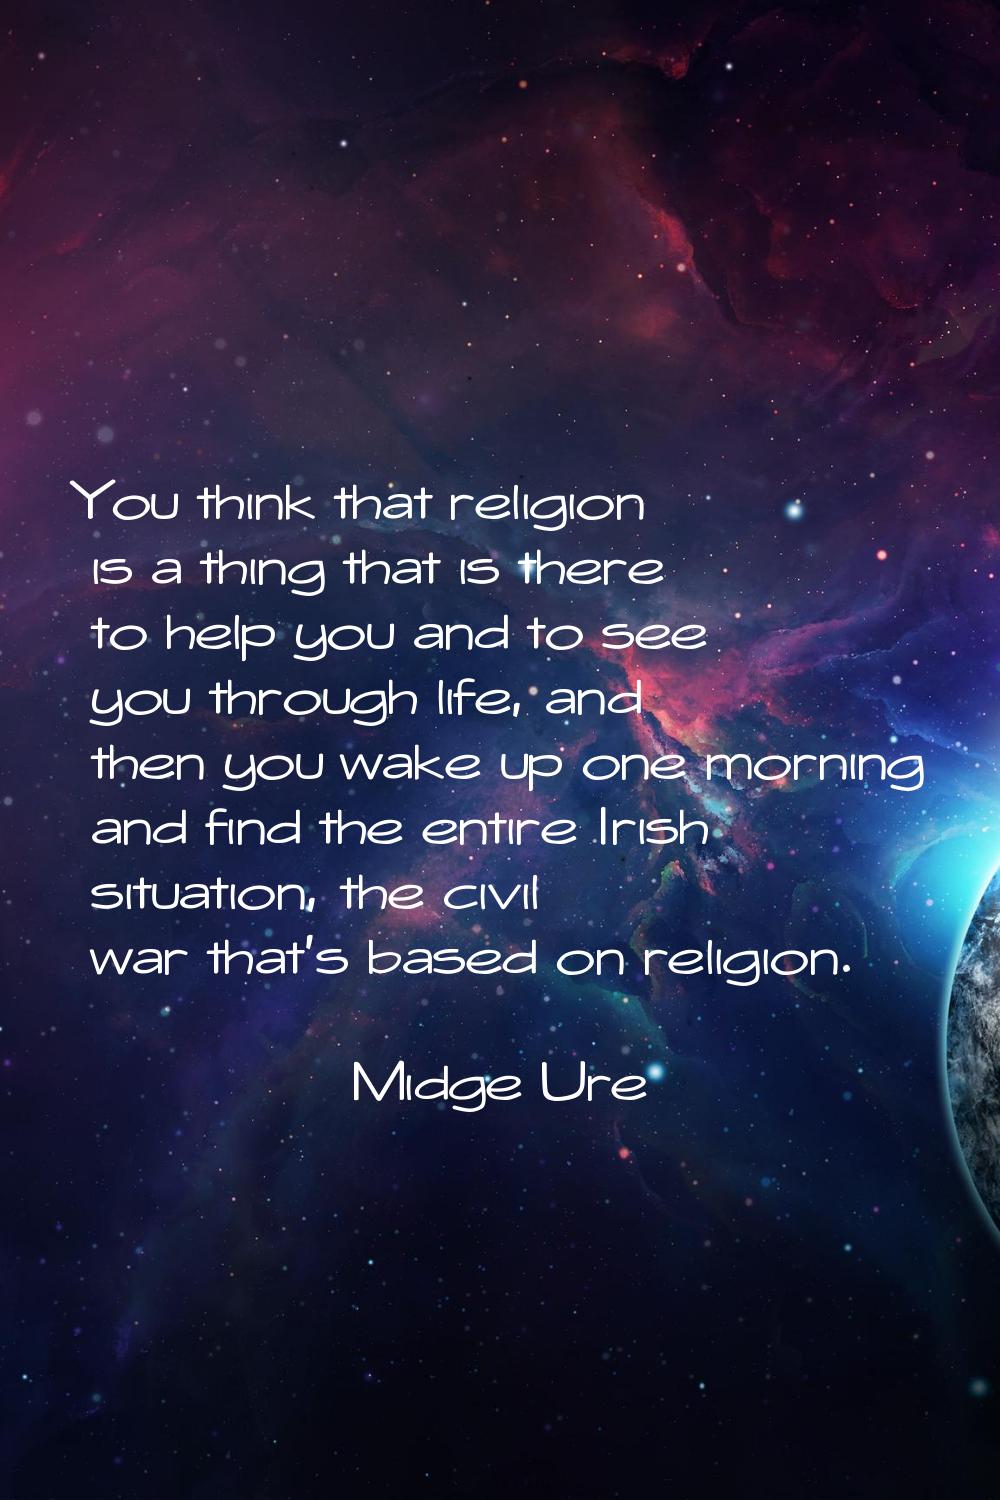 You think that religion is a thing that is there to help you and to see you through life, and then 